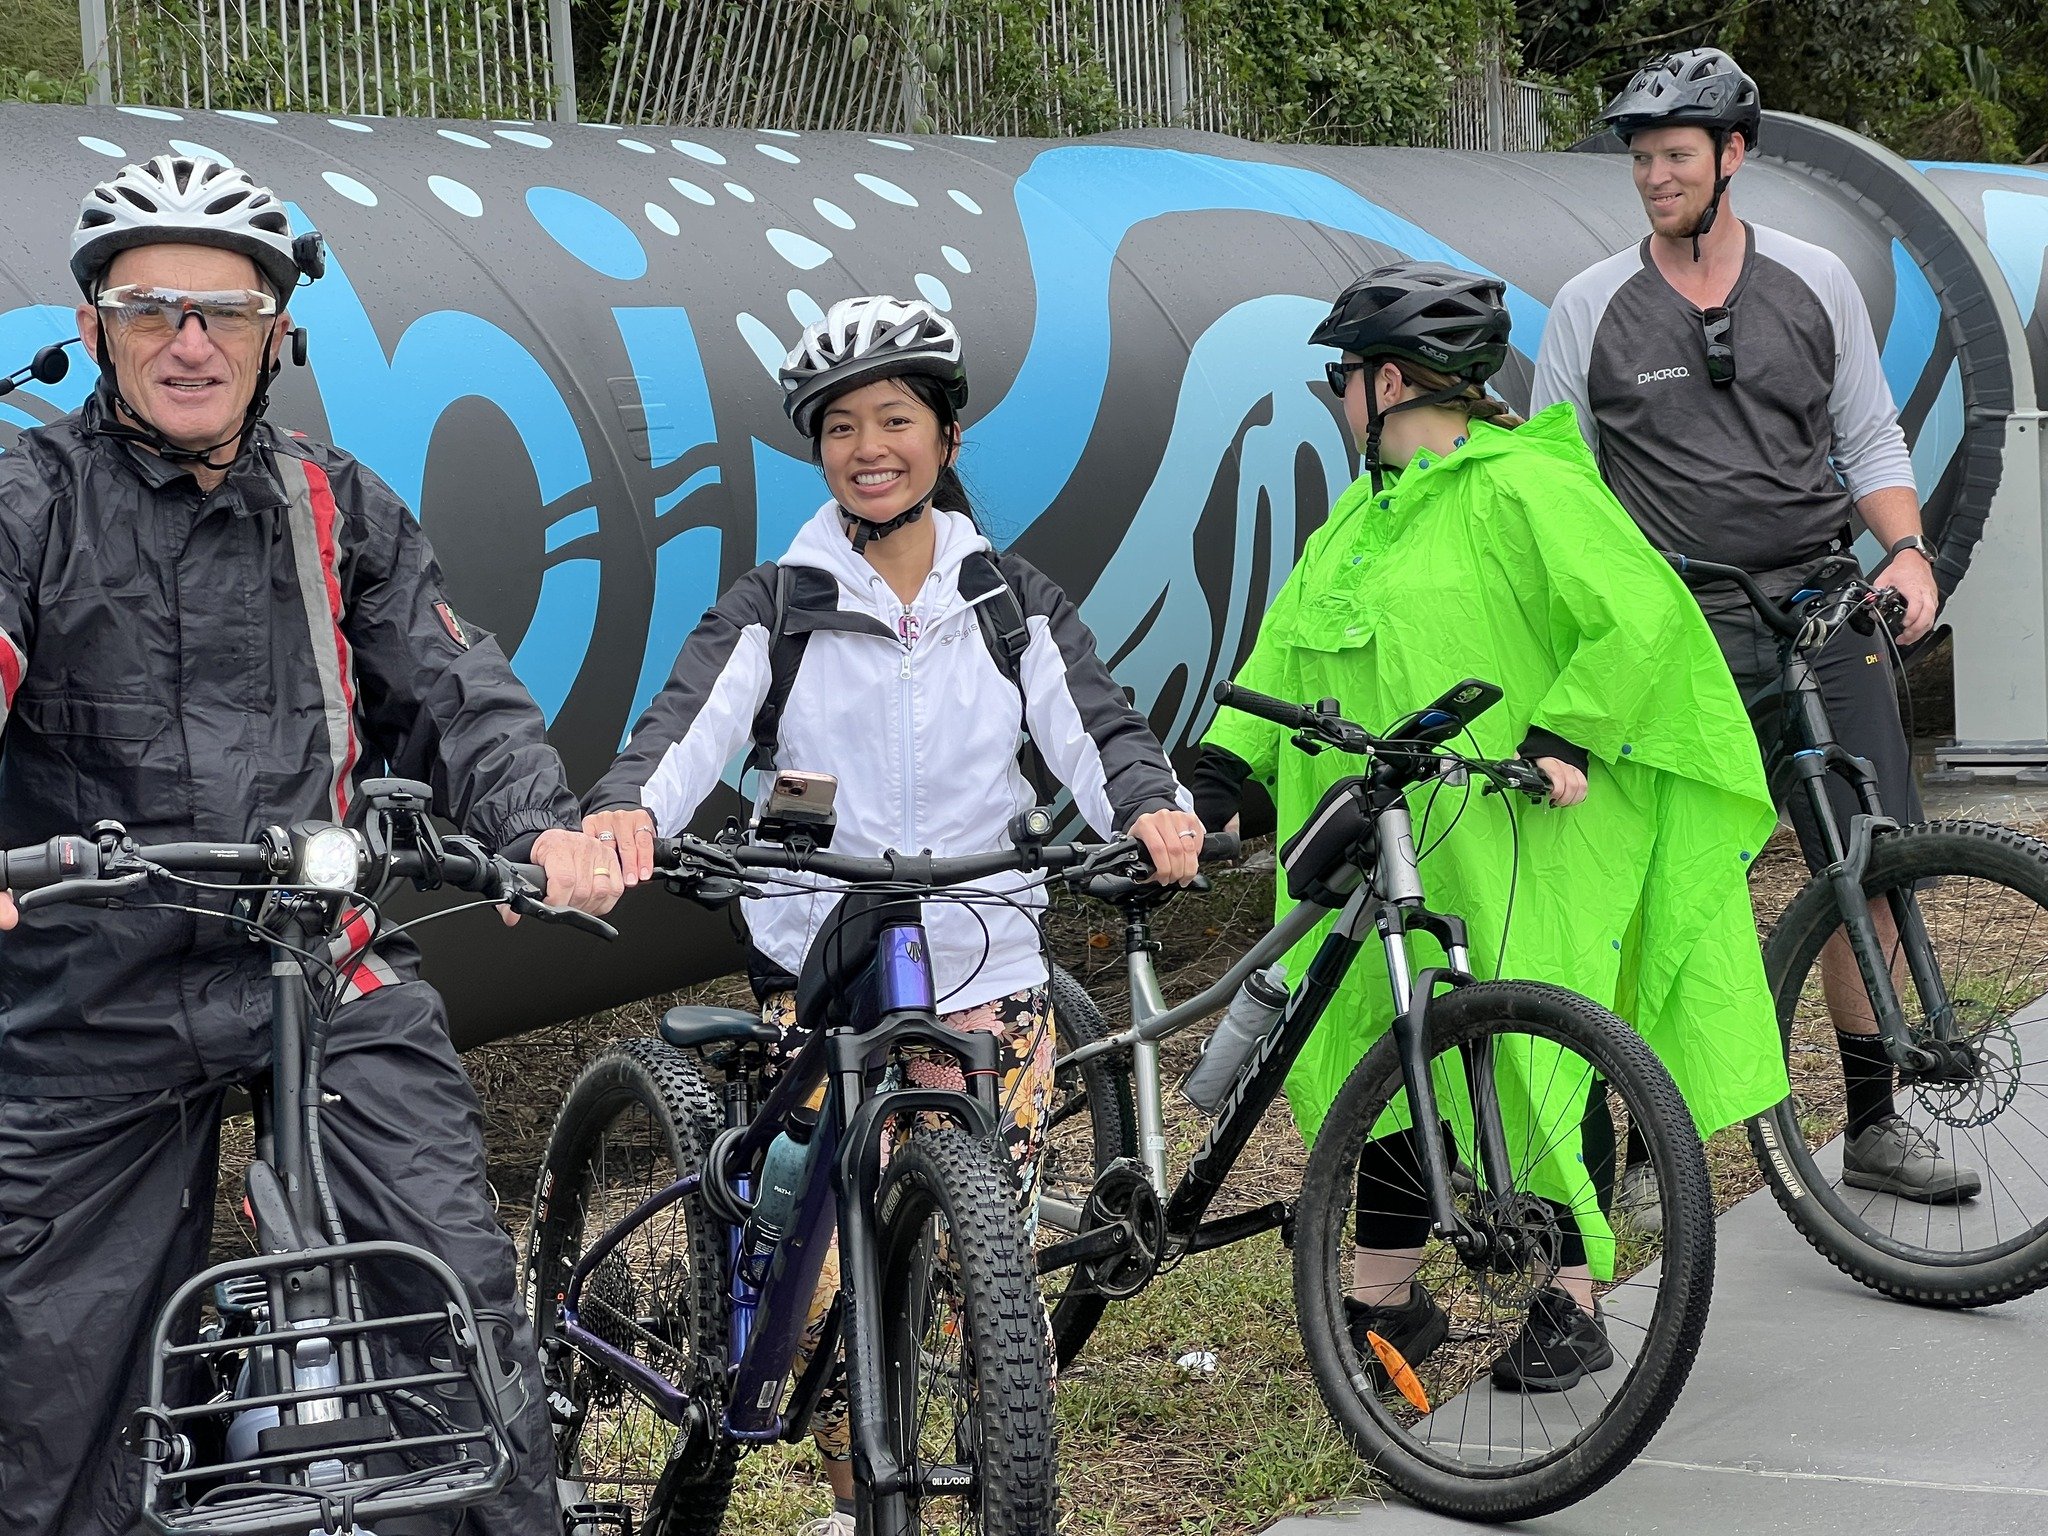 Join in on this Free Guided Ride! Saturday, 11th May 9.30am
Discover new cycleways on a leisurely bike ride that starts in Erskineville, rolls through to Tempe and loops back via an alternative route. This ride highlights all the options for planning